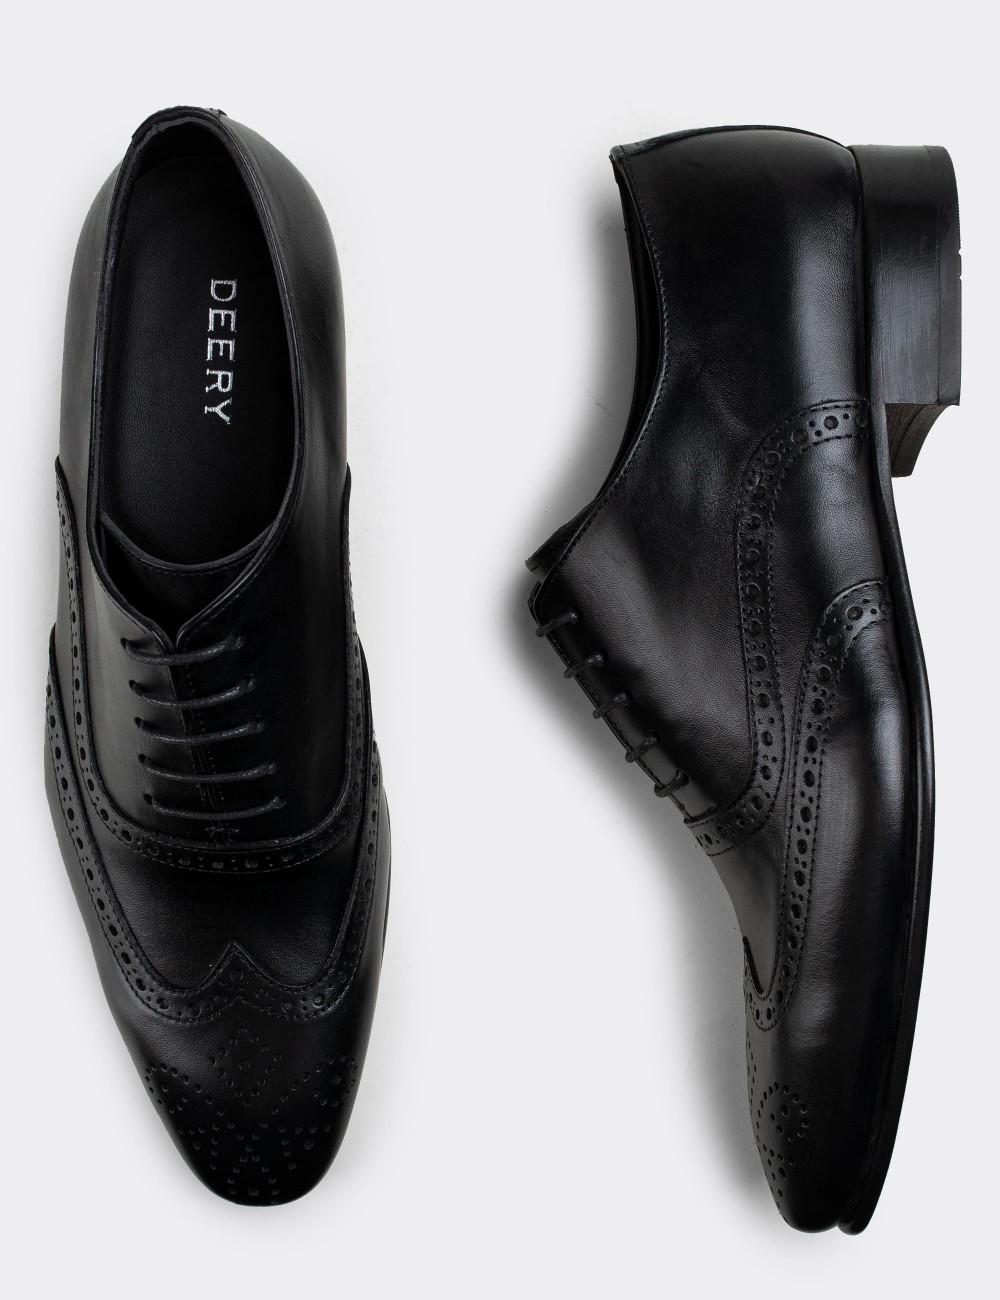 Black  Leather Classic Shoes - 01785MSYHK02